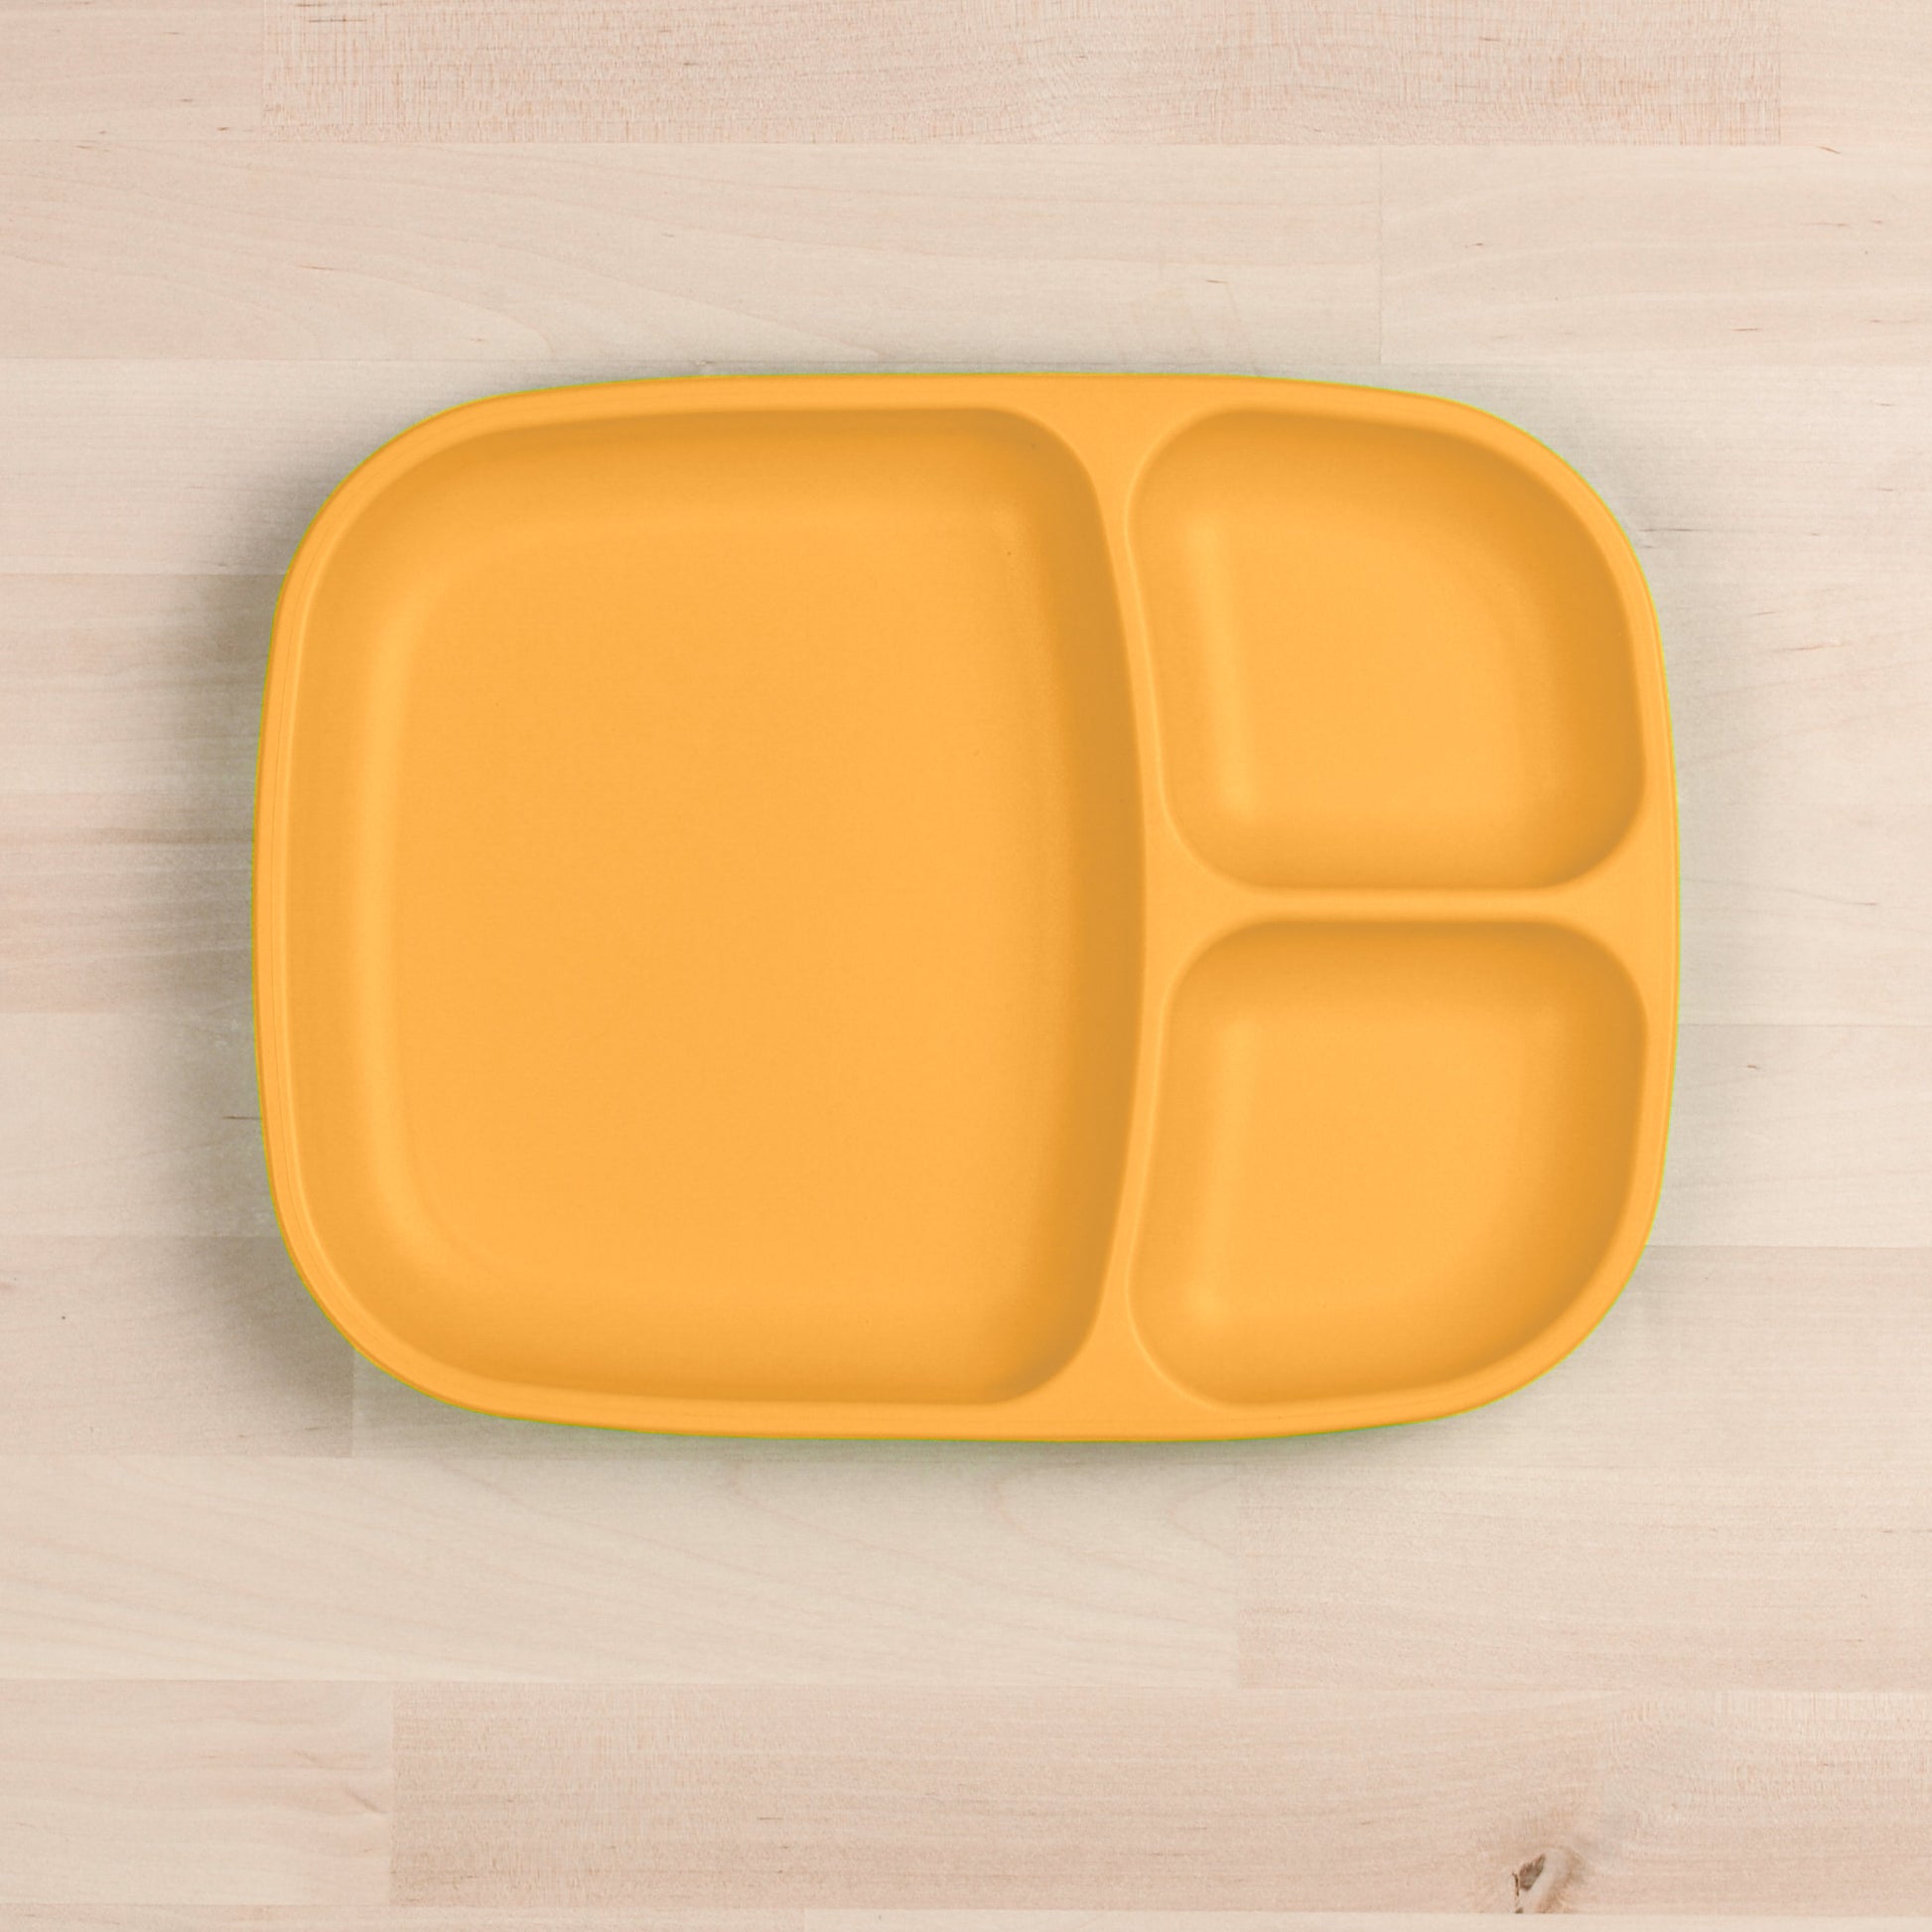 Re-Play Divided Tray in Sunny Yellow from Bear & Moo